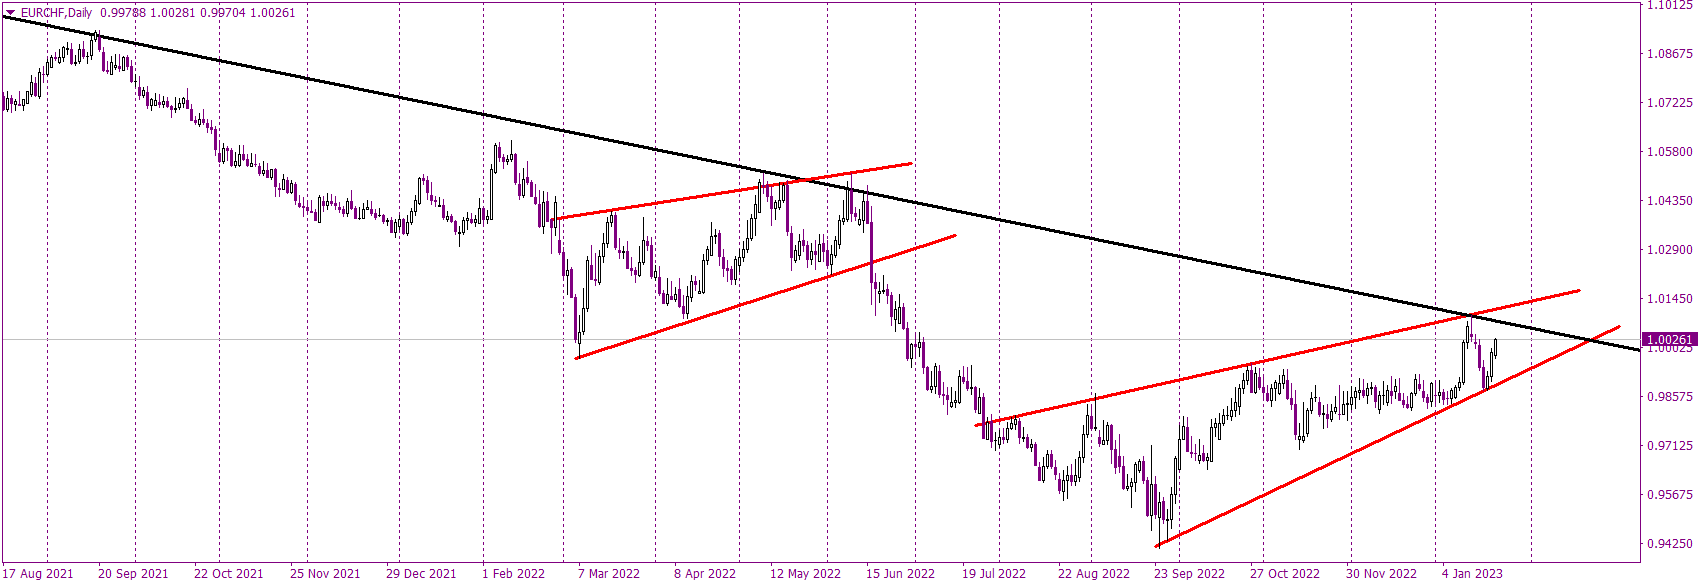 EURCHF trades in wedge, waiting for bearish breakout